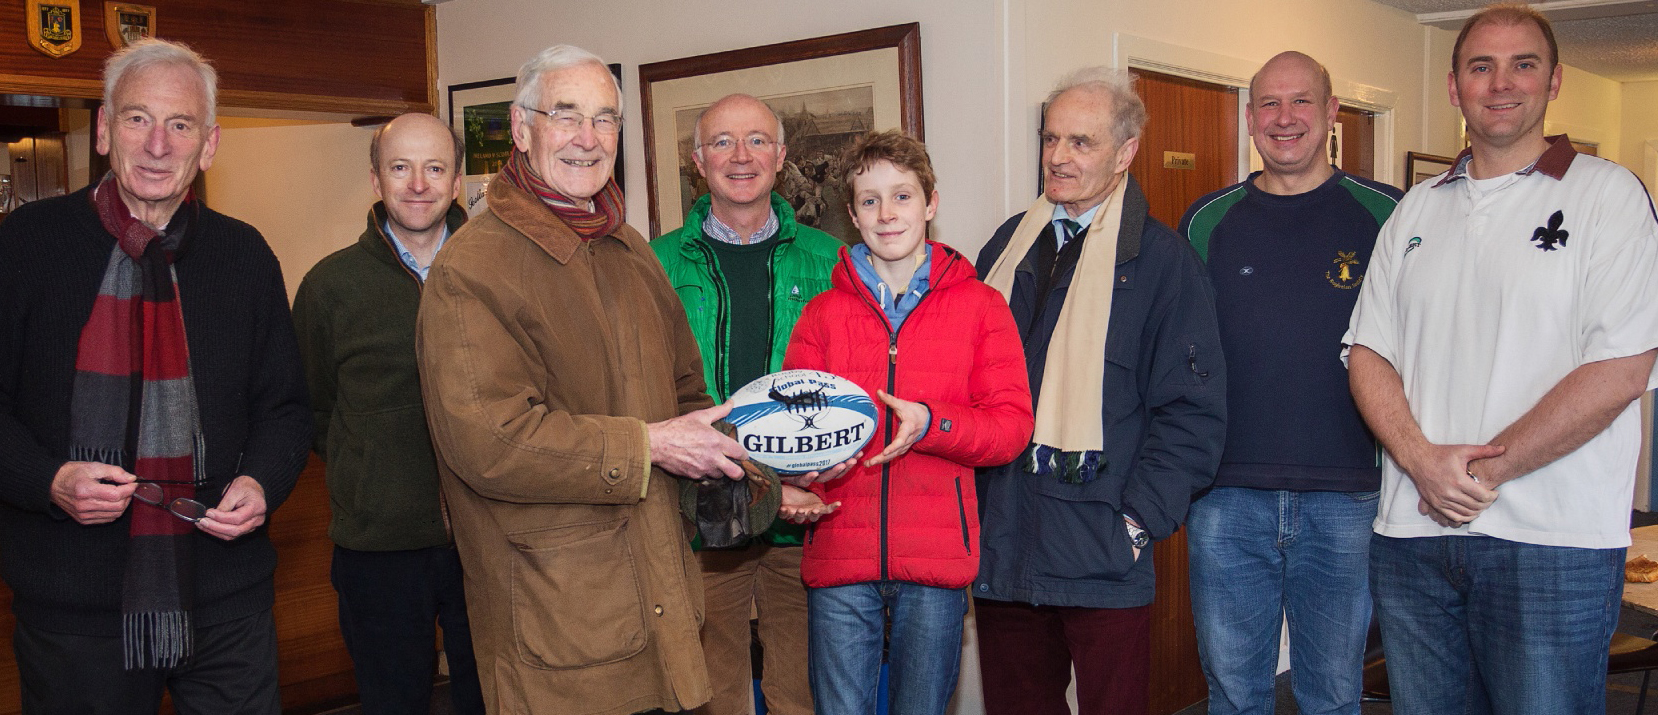 Rugbeians at Raeburn Place for Rugby School's 450th anniversary